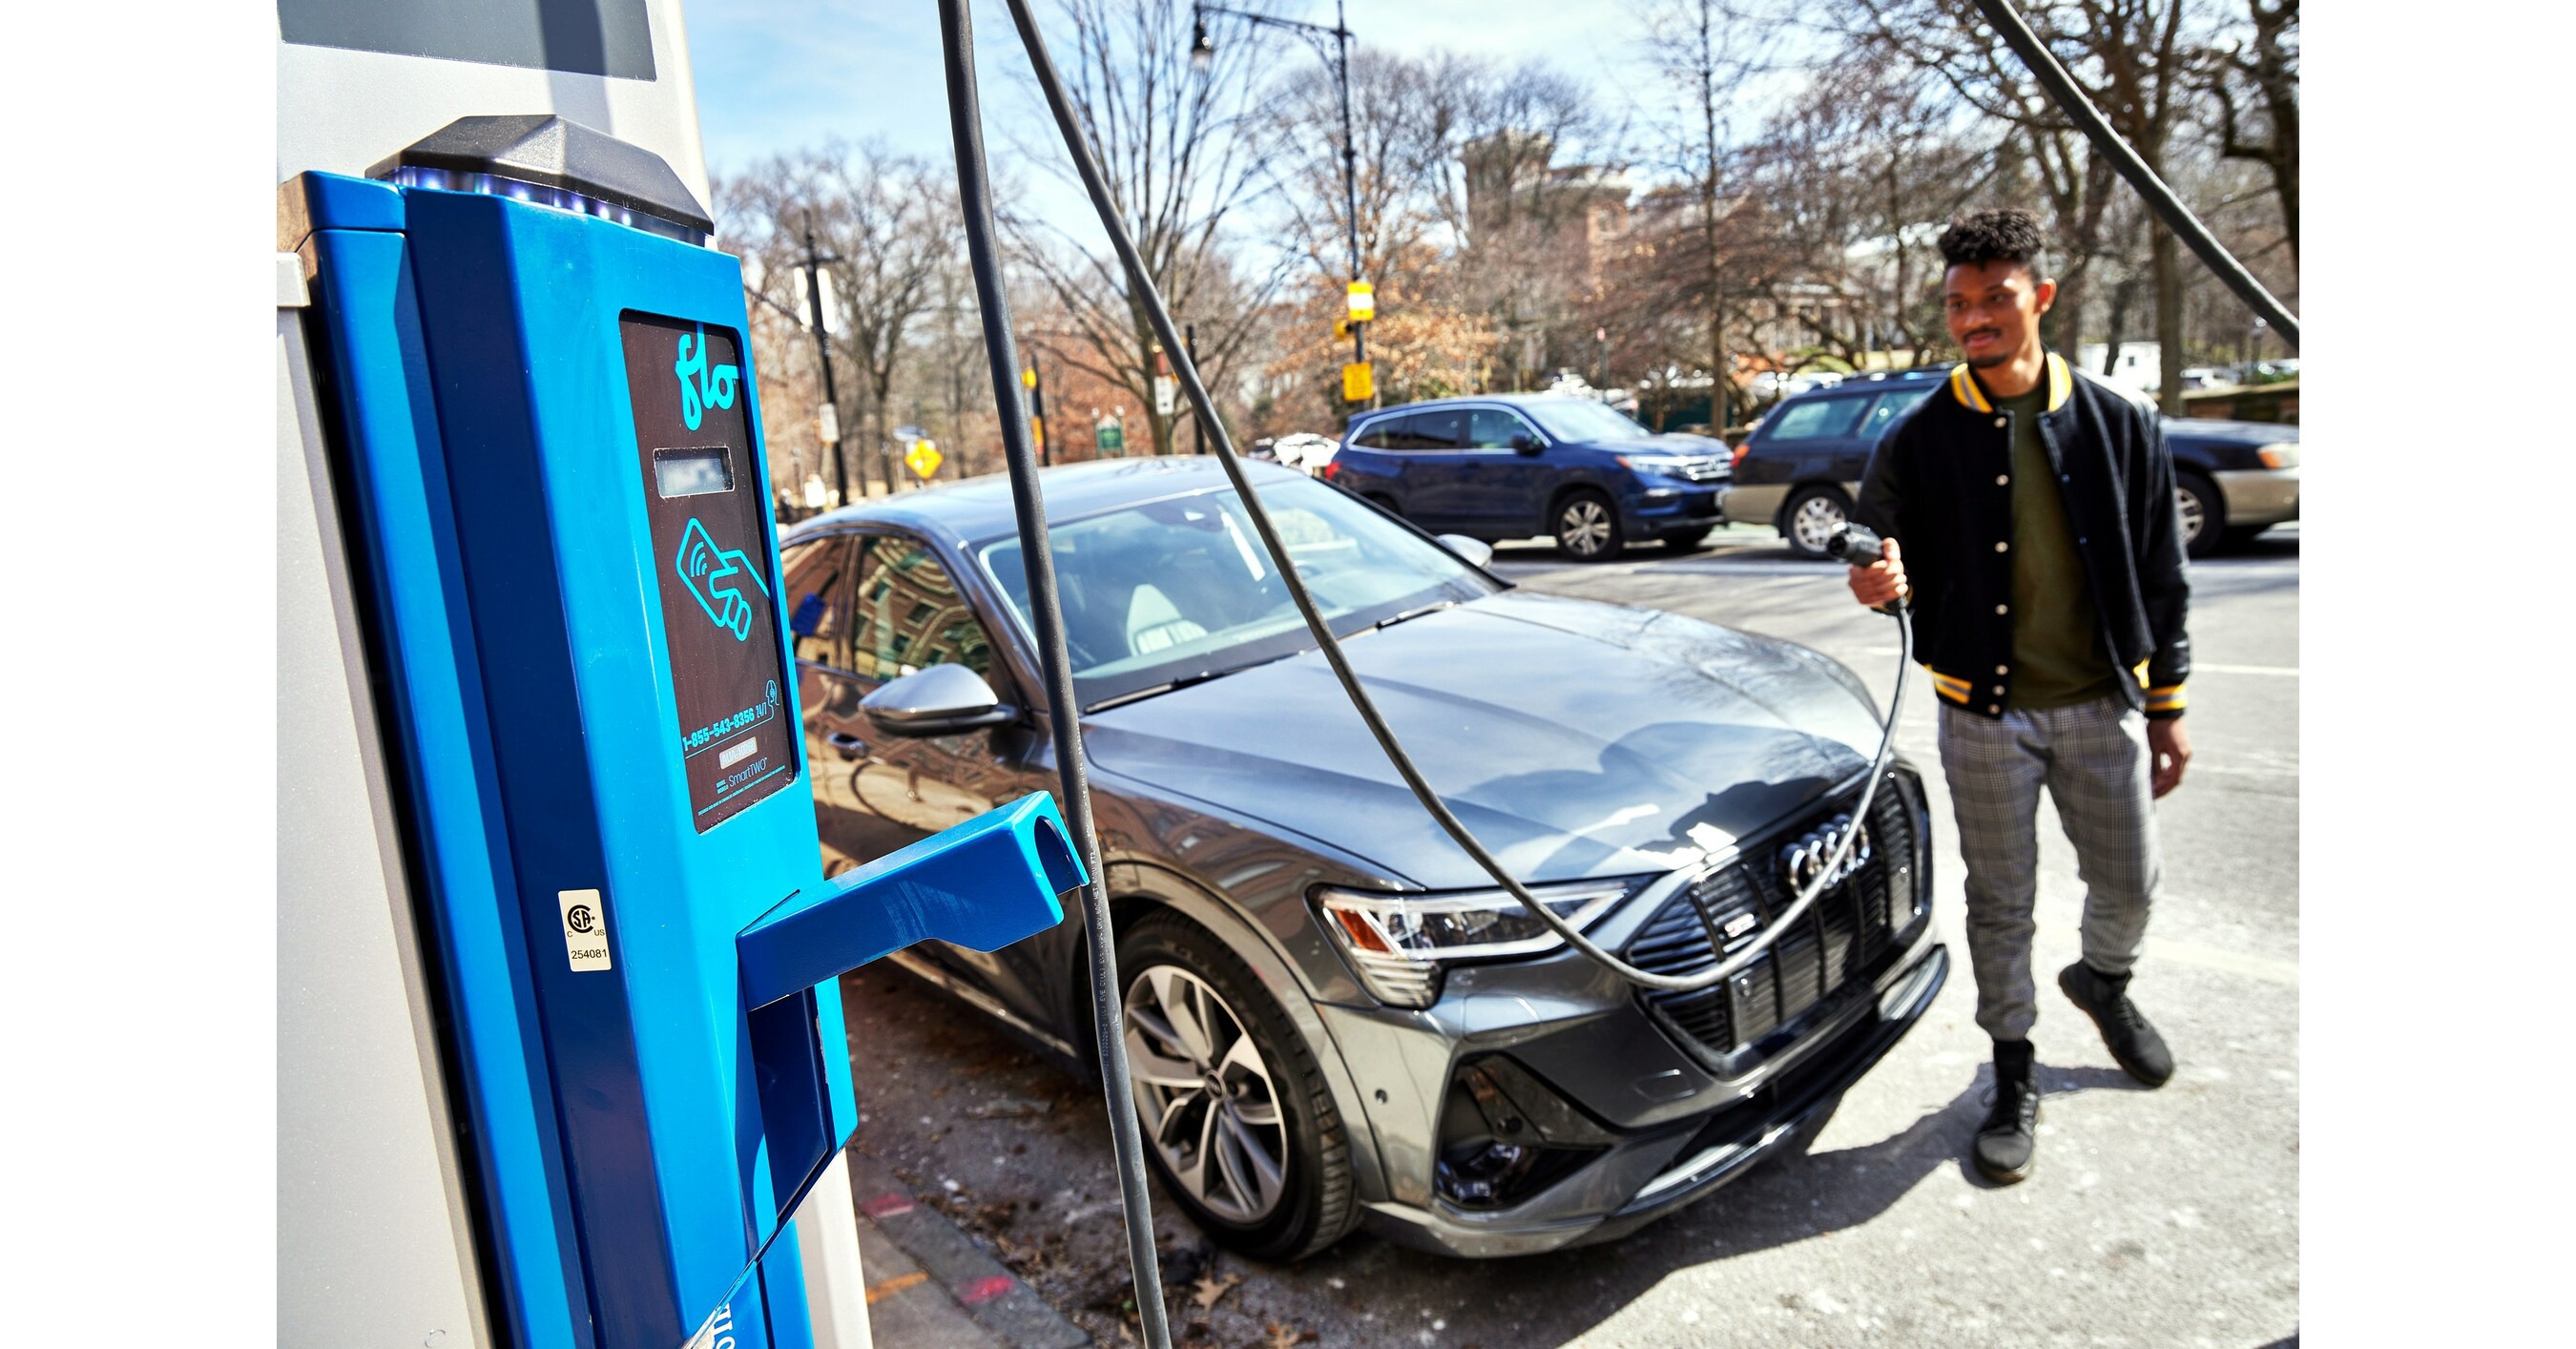 FLO joins the National Charging Experience Consortium led by the US DOE